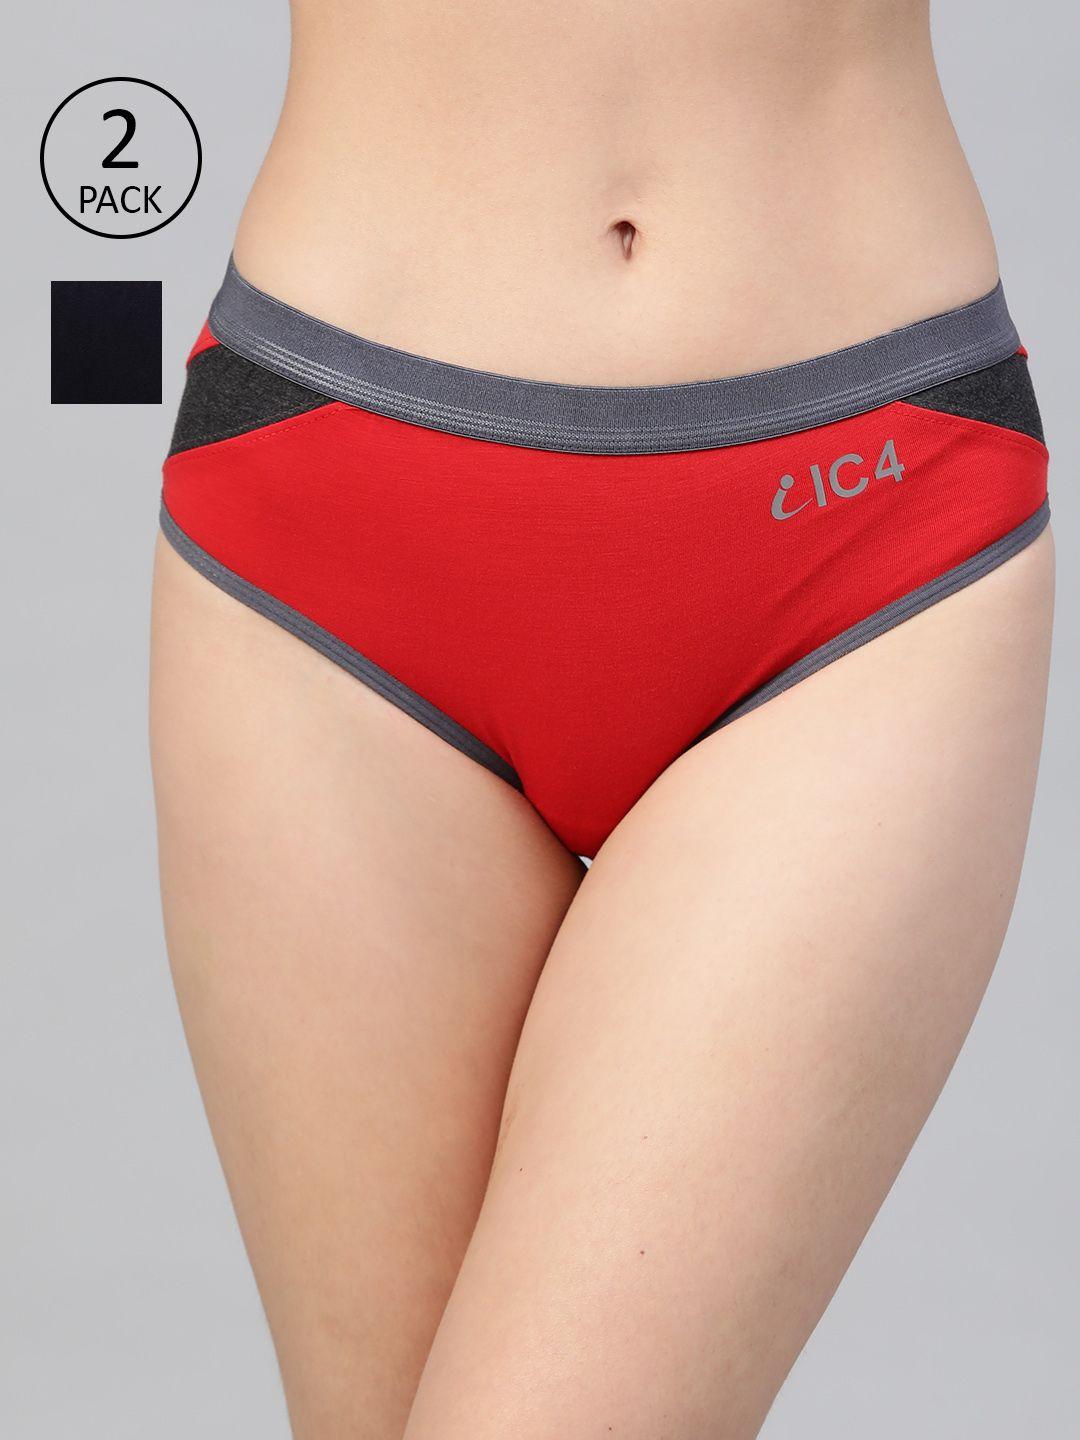 ic4 women pack of 2 solid hipster briefs 0n-r-1006p2